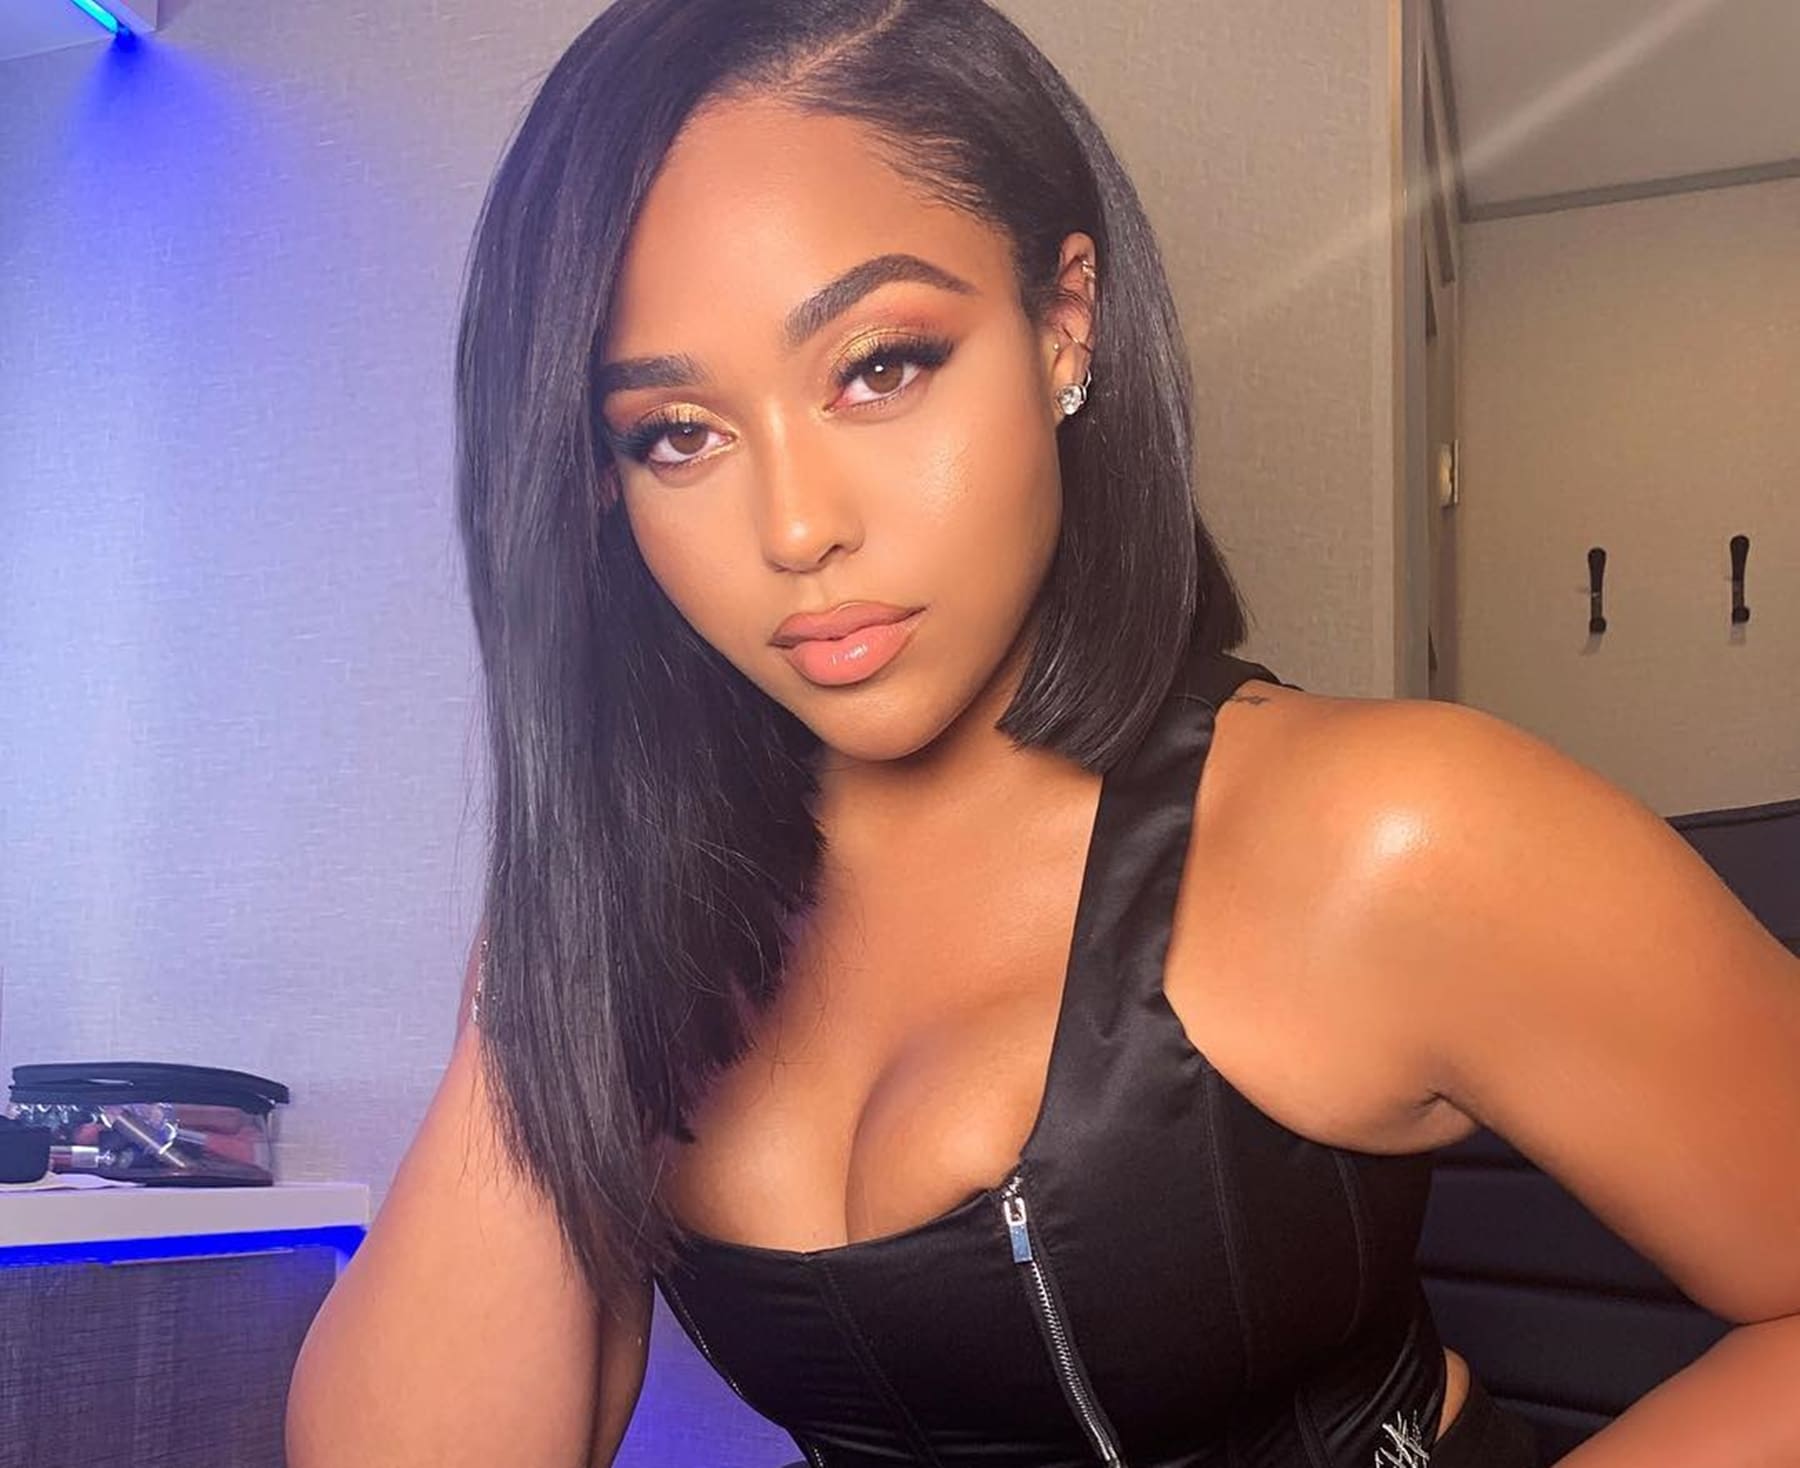 jordyn-woods-latest-video-featuring-her-bf-will-make-your-day-check-out-the-video